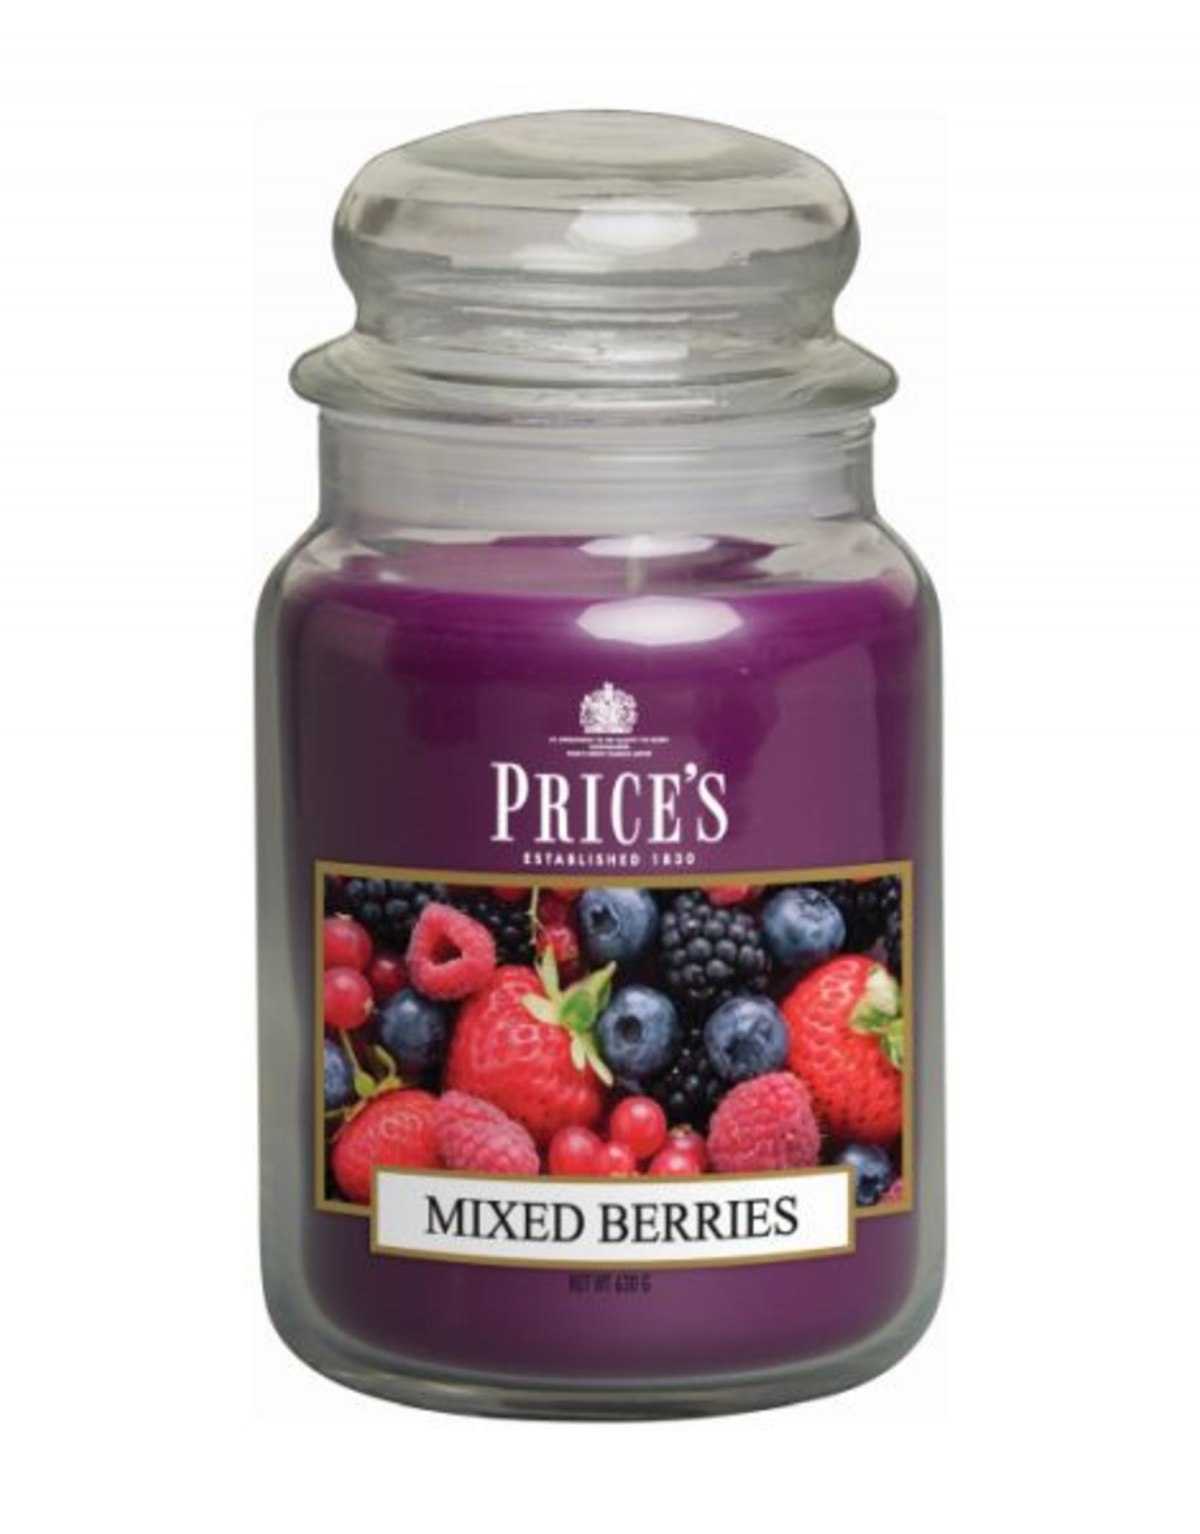 Scented candle in large jar...